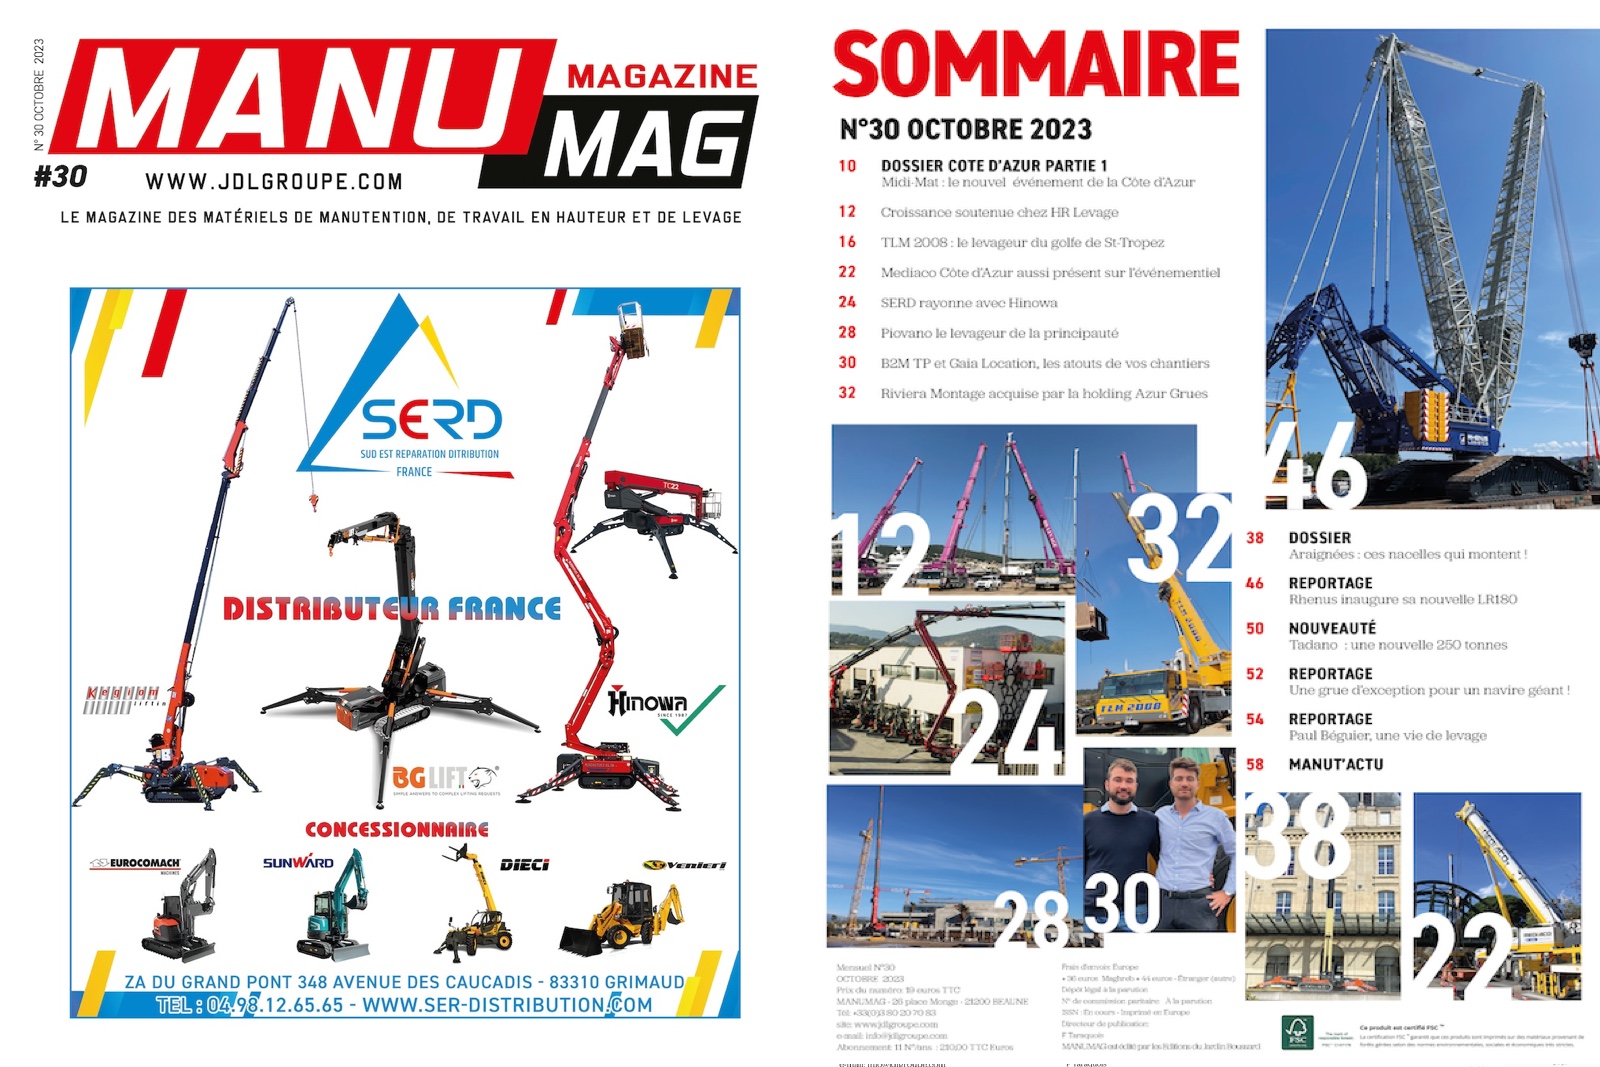 DISCOVER THE LATEST ISSUE OF MANUMAG N°30